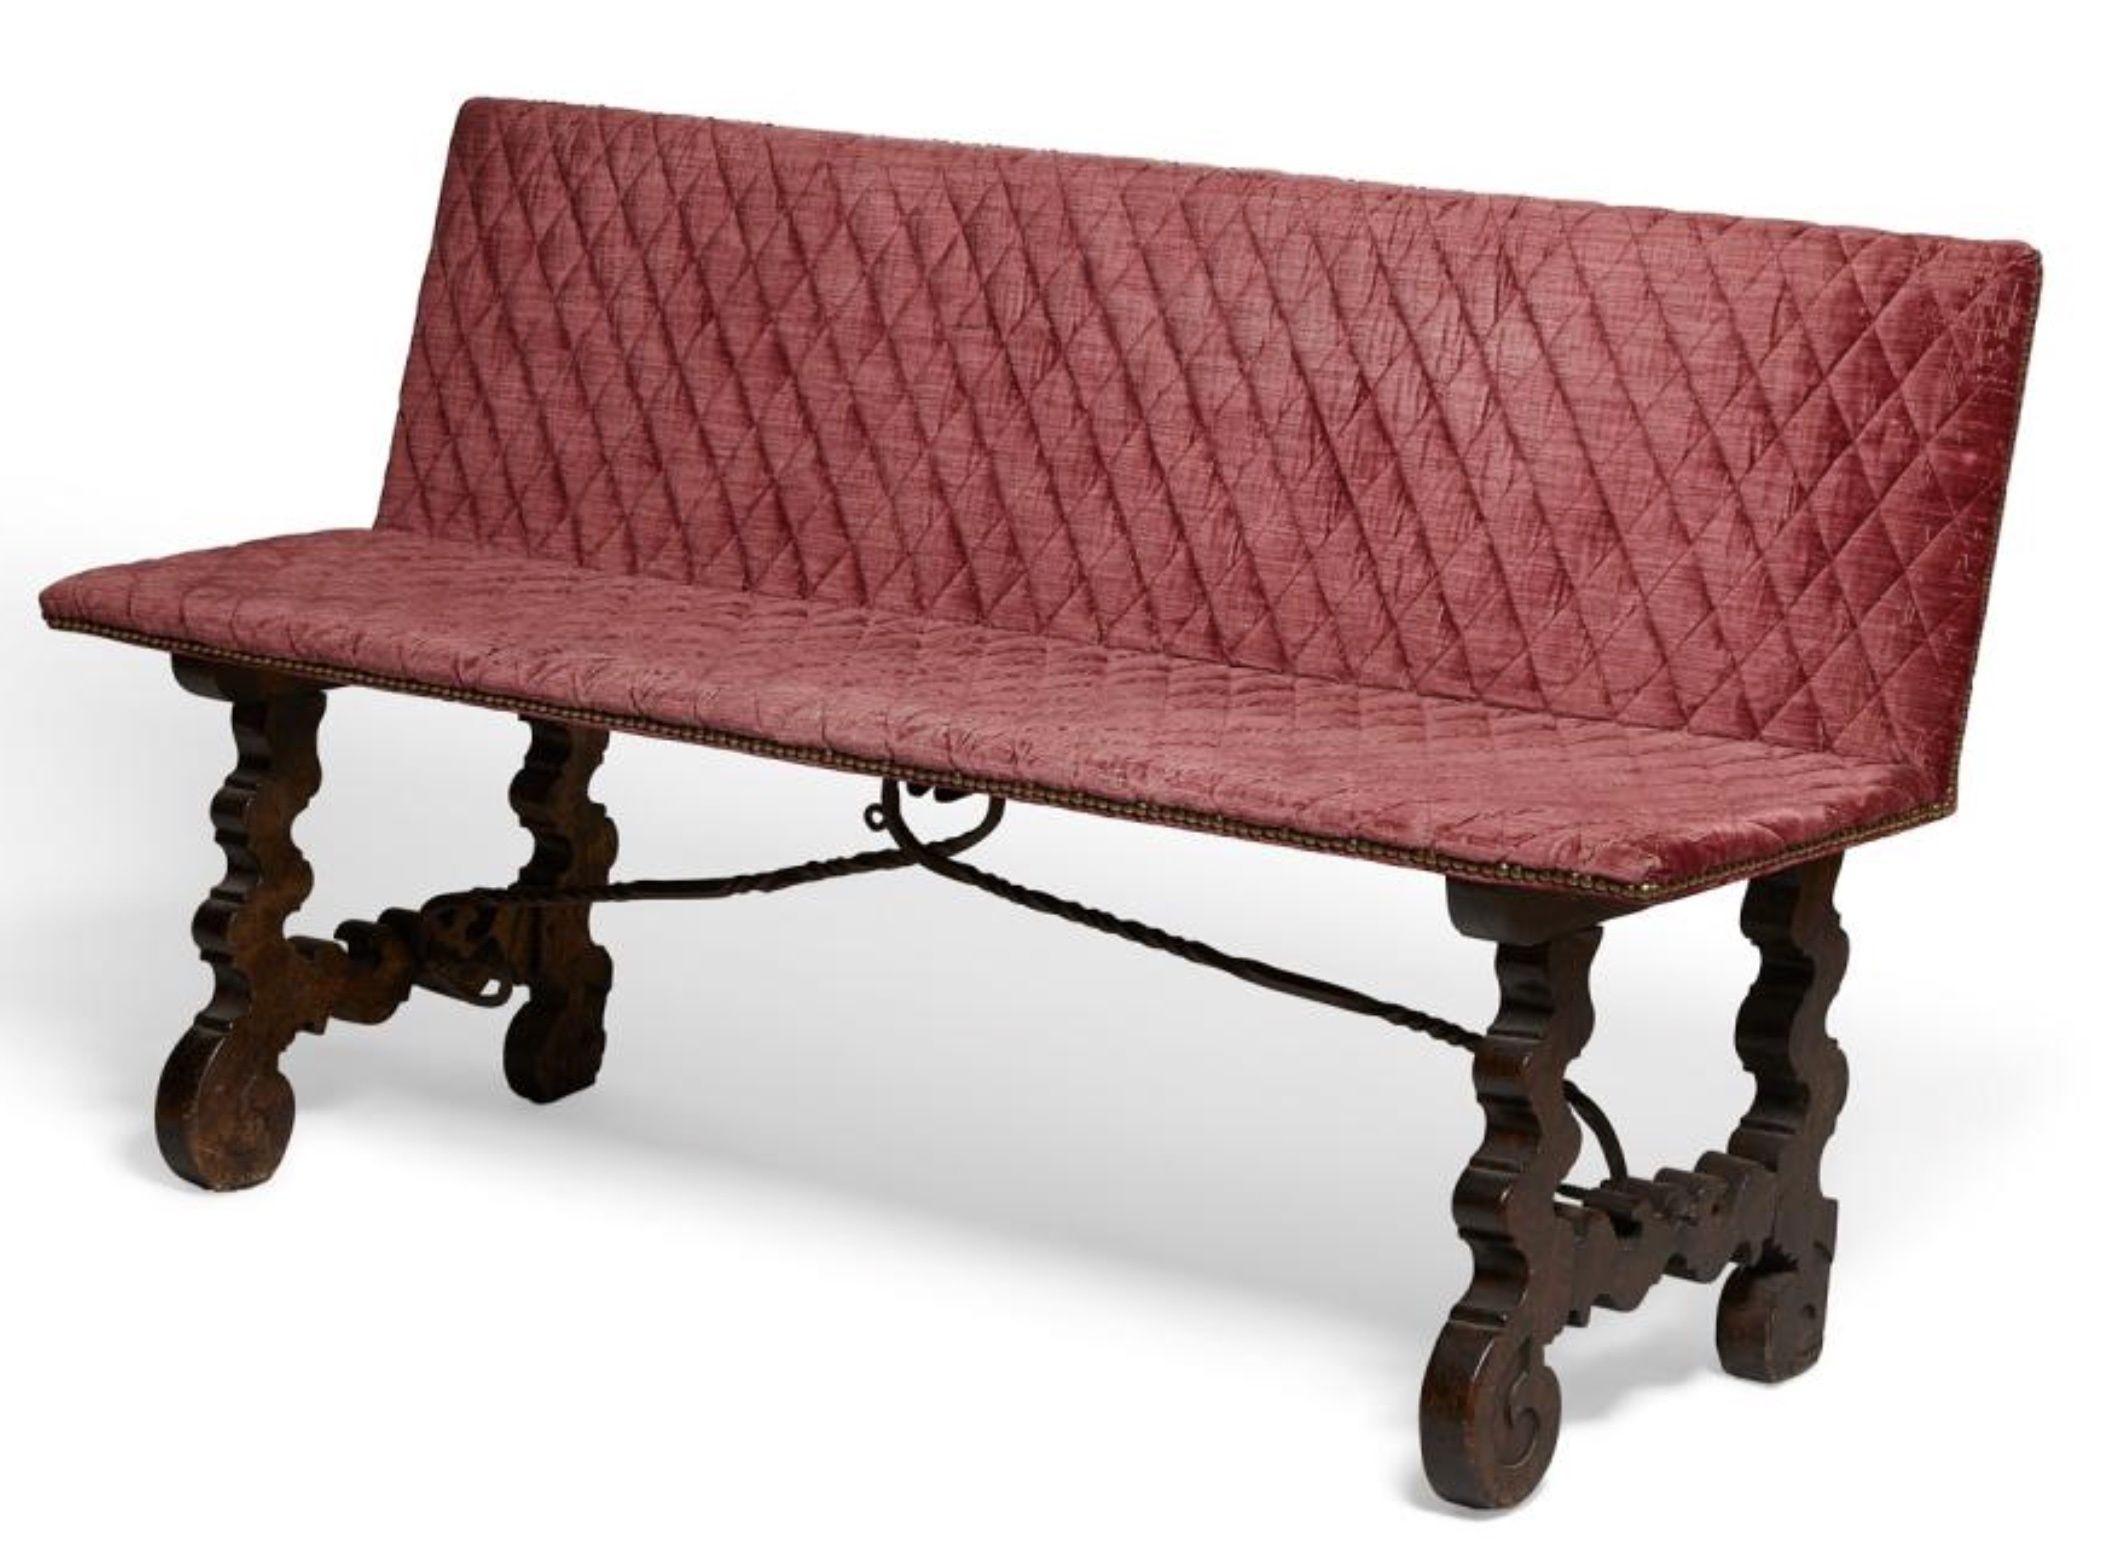 An 18th century Spanish Baroque style red velvet upholstered chestnut bench with wrought iron mounted brass.

Dimensions: Height 33 in. (84 cm), width 60 in. (153 cm), depth of seat 14.5 in. (37 cm) height of seat 19 in.